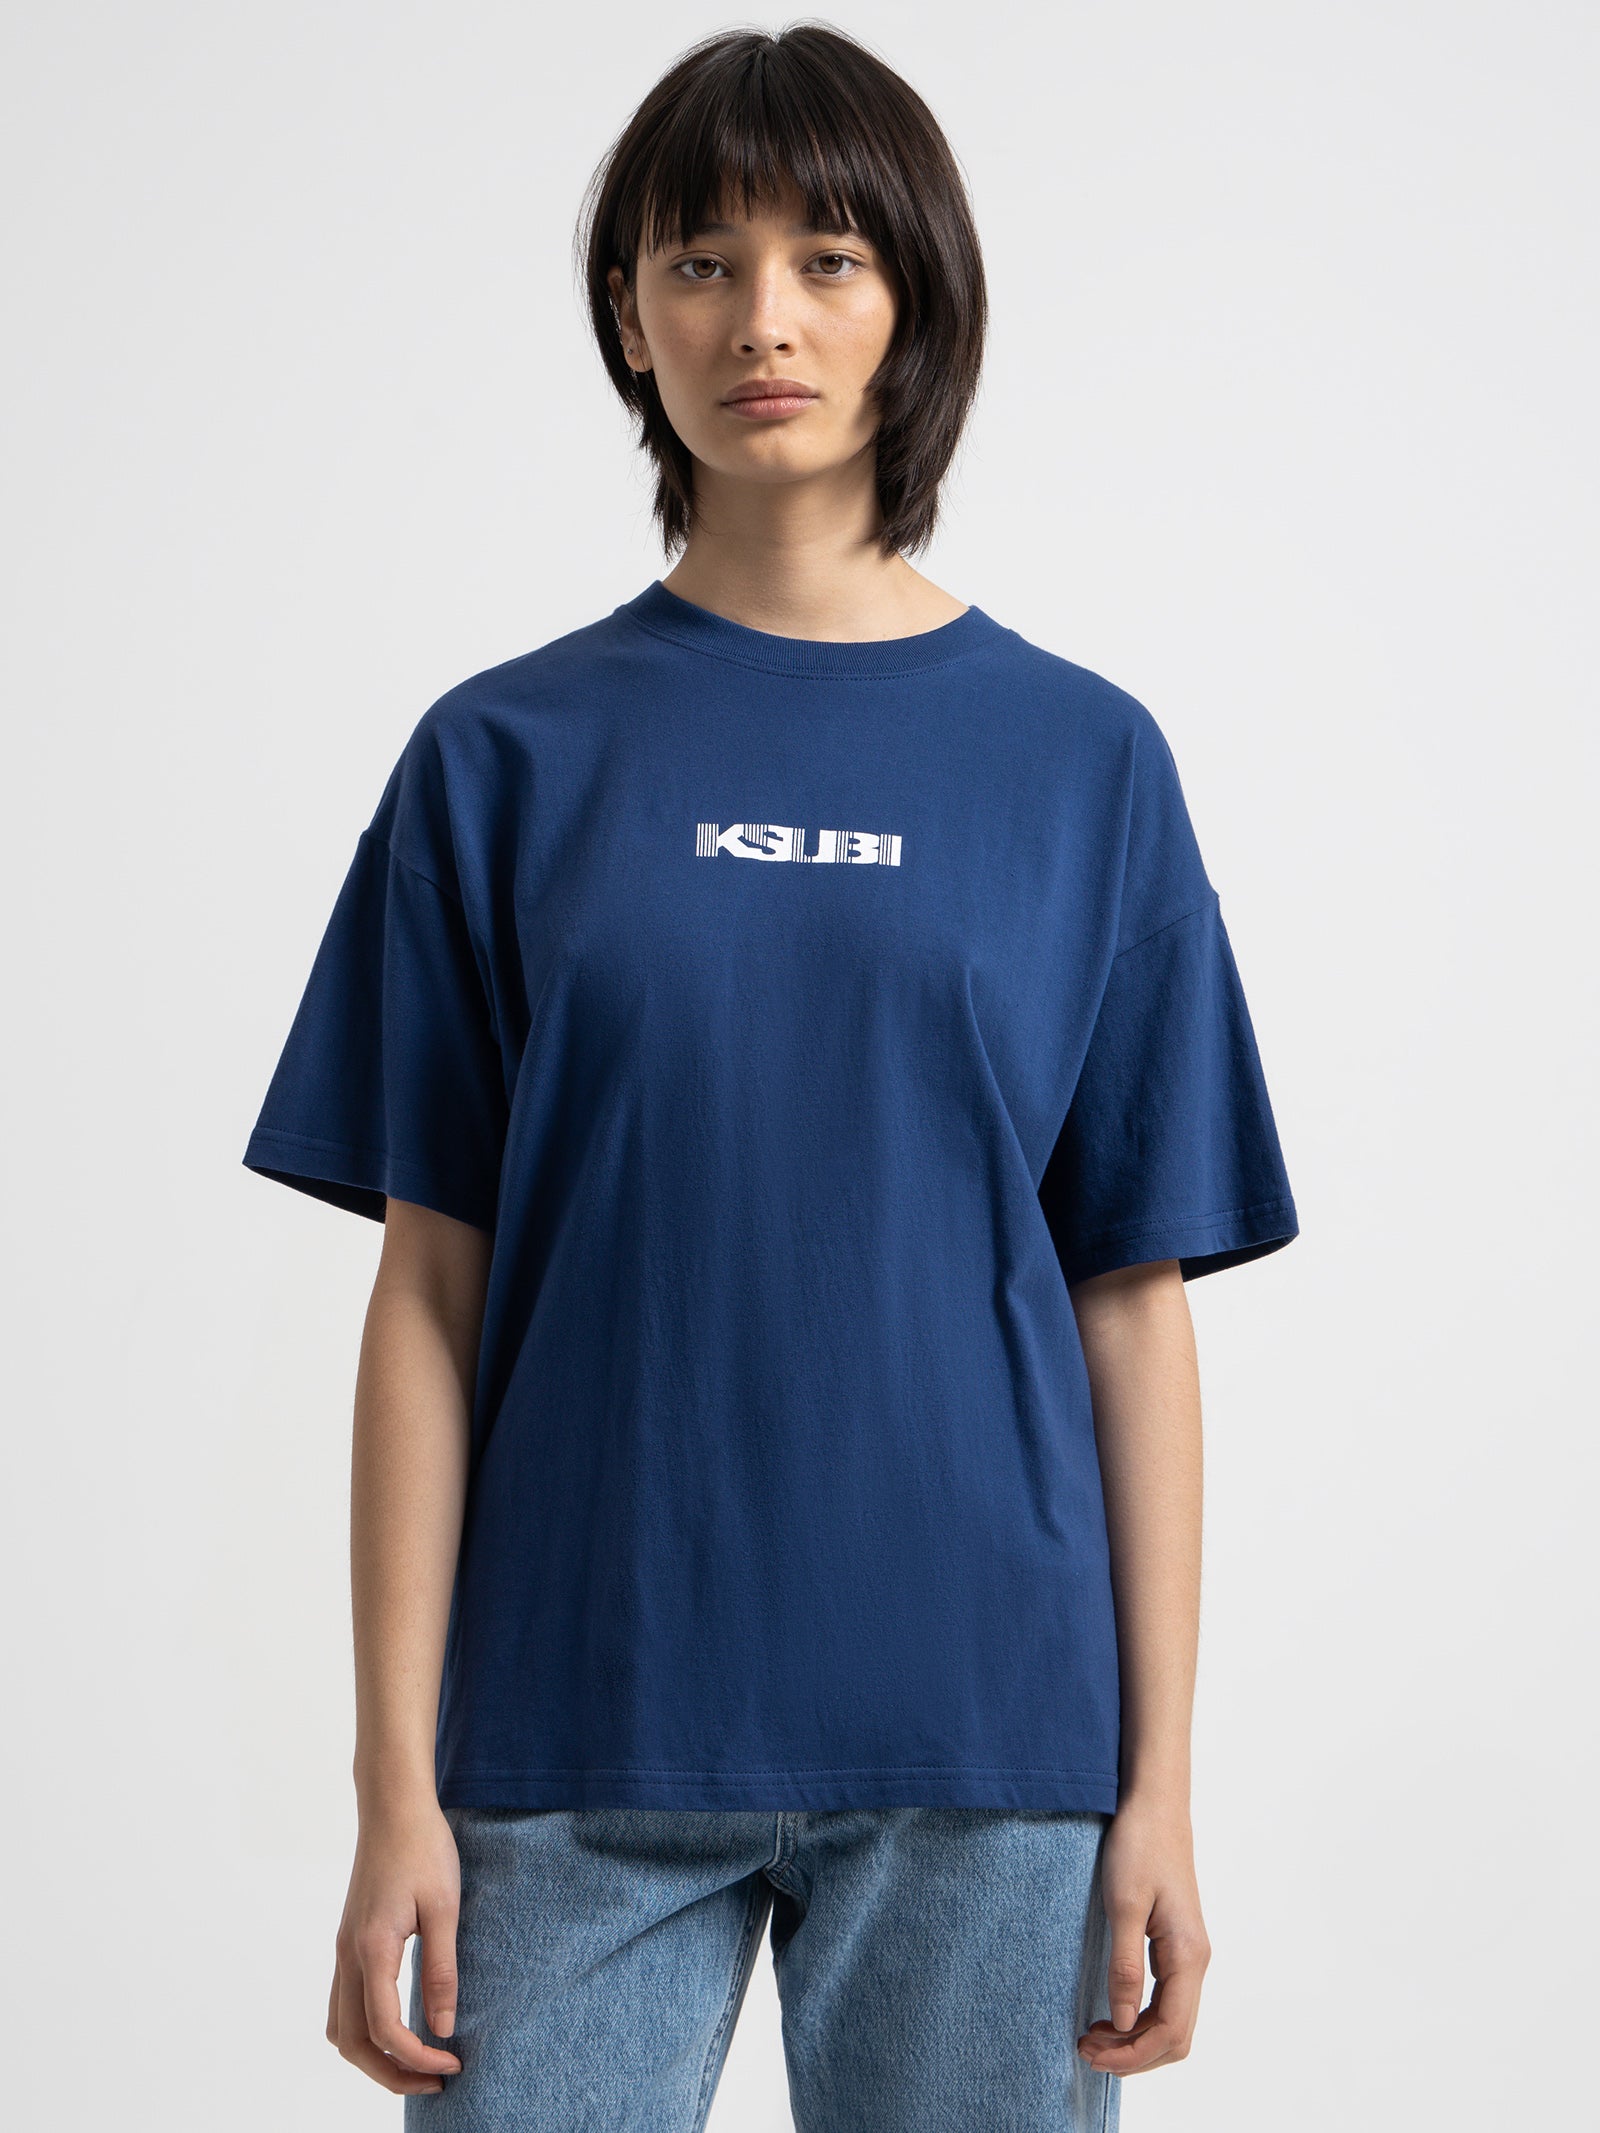 Sott Oh G SS T-Shirt in Navy - Glue Store